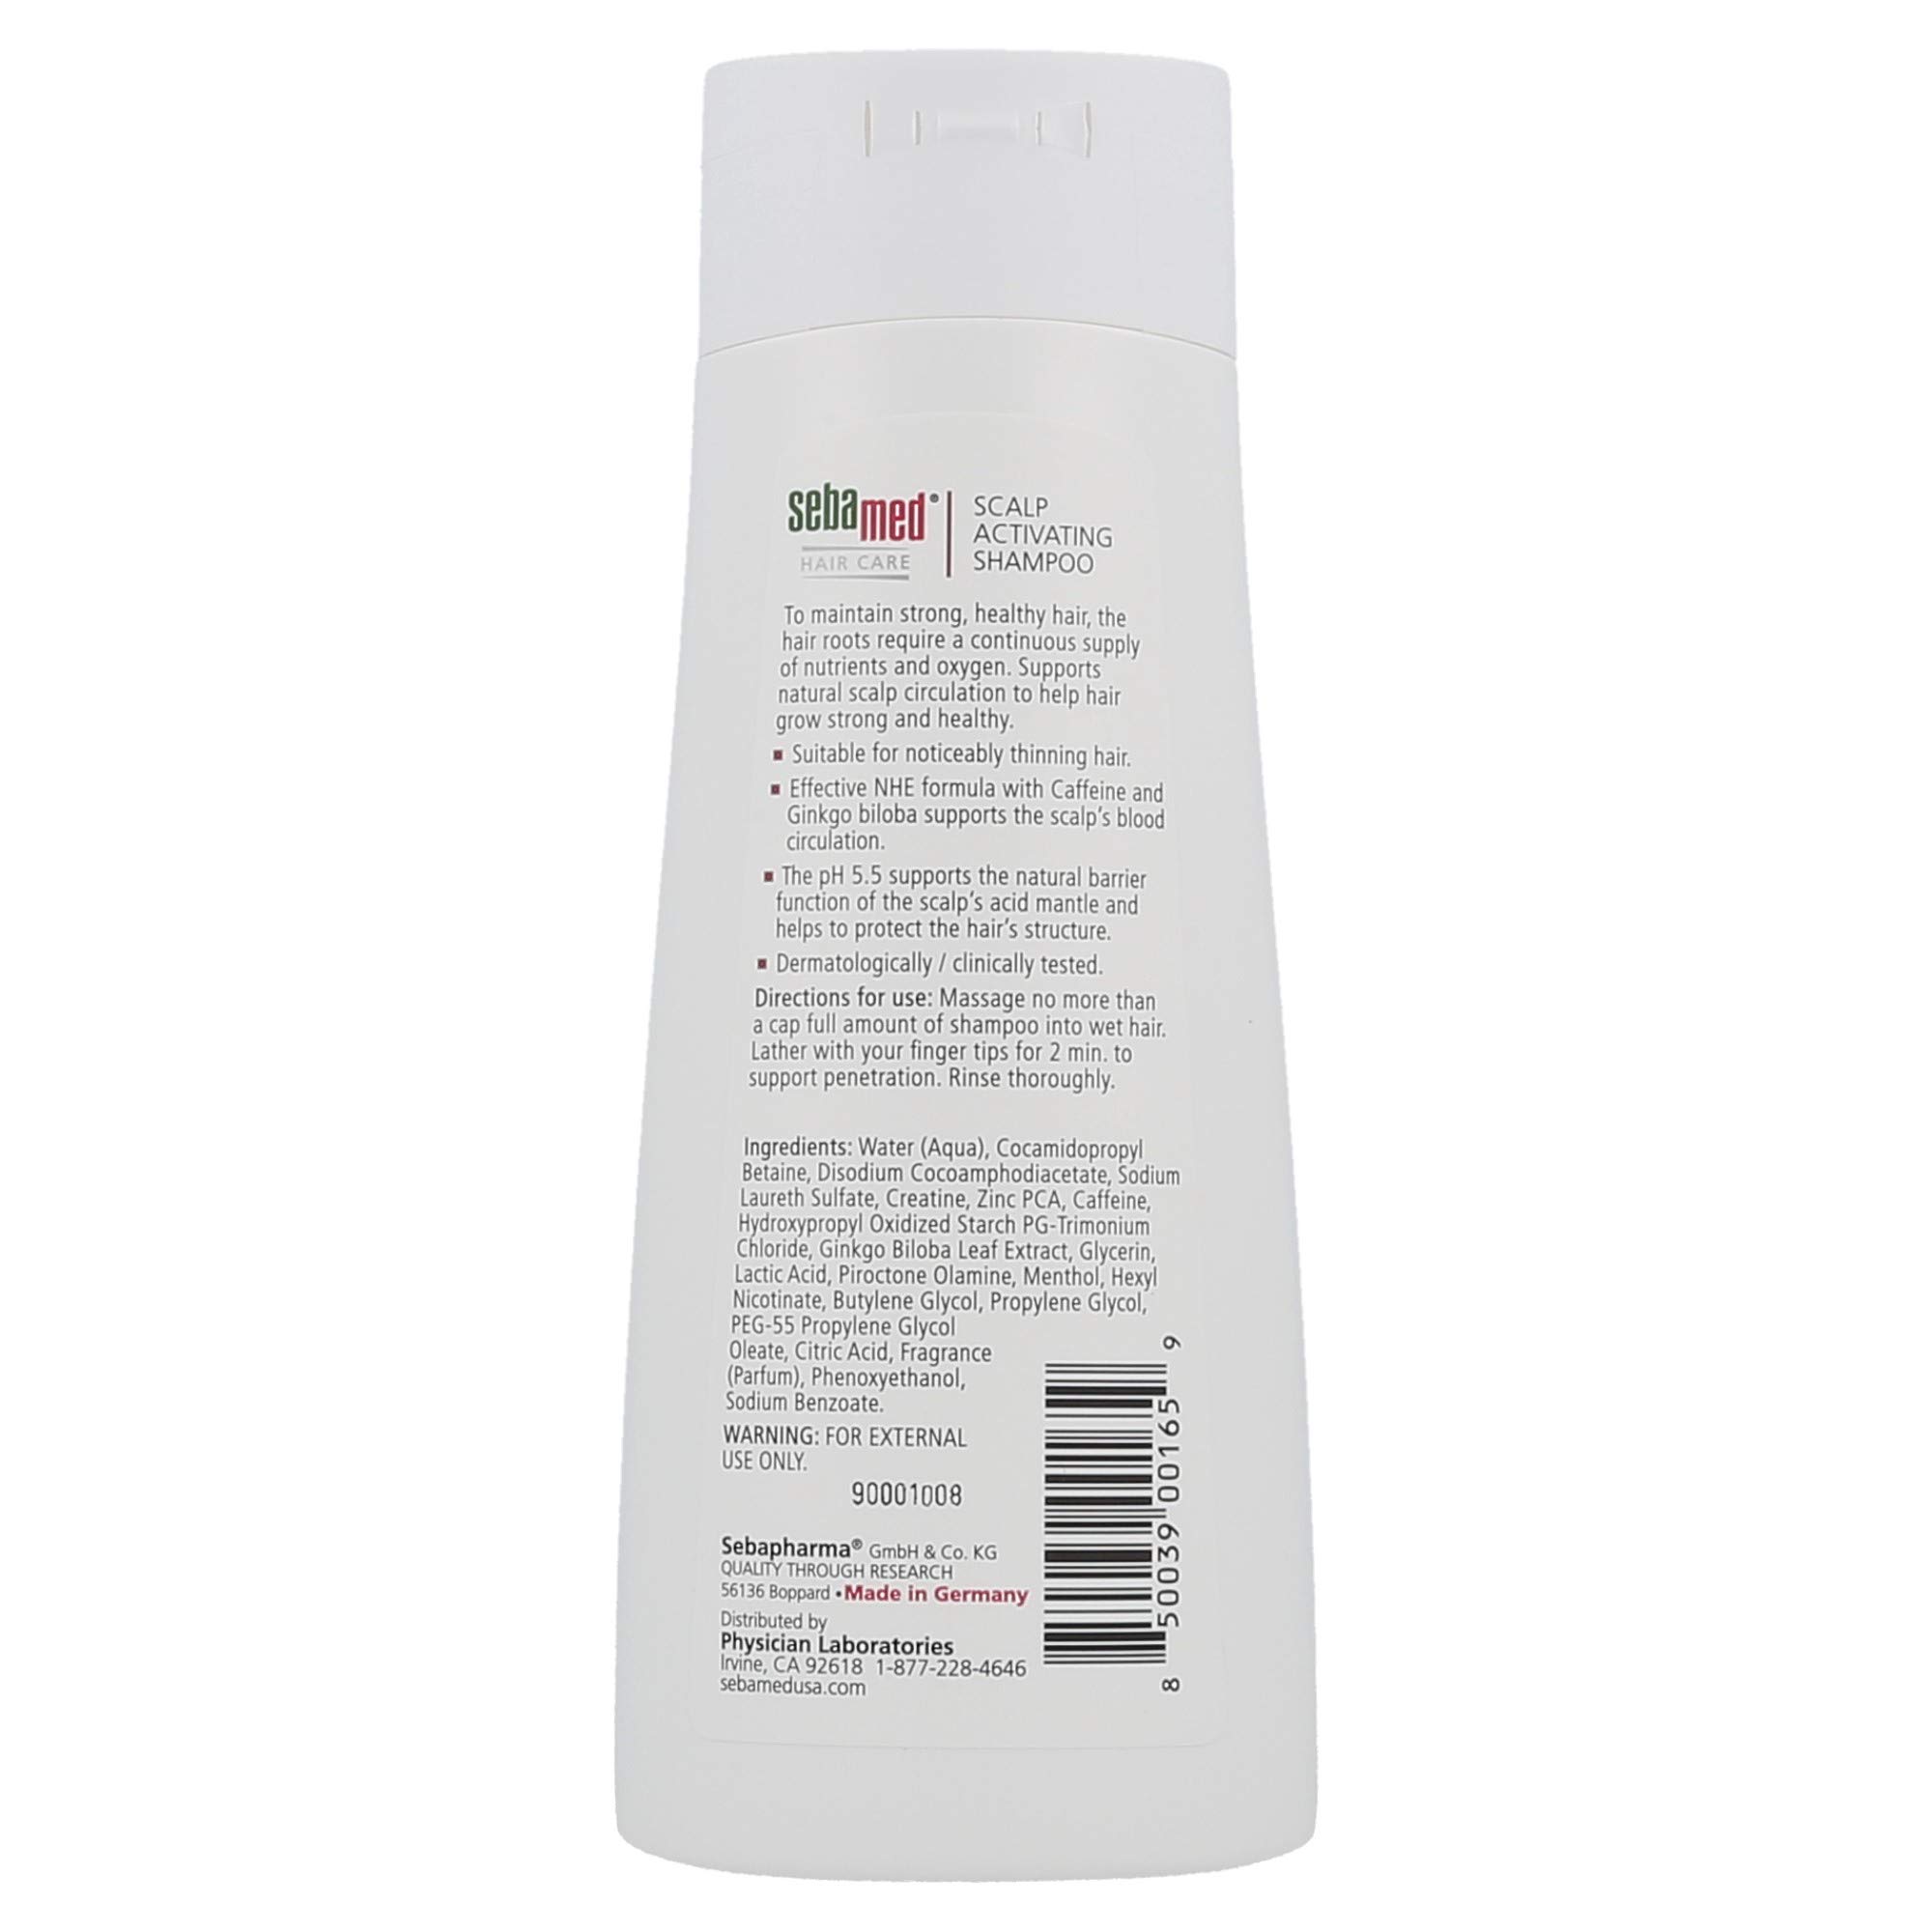 sebamed UK - Our Anti-Hairloss Shampoo reduces hair loss by activating the  functions of the scalp, in turn increasing circulation to strengthen your  hair roots. It is carefully formulated with pH5.5, which